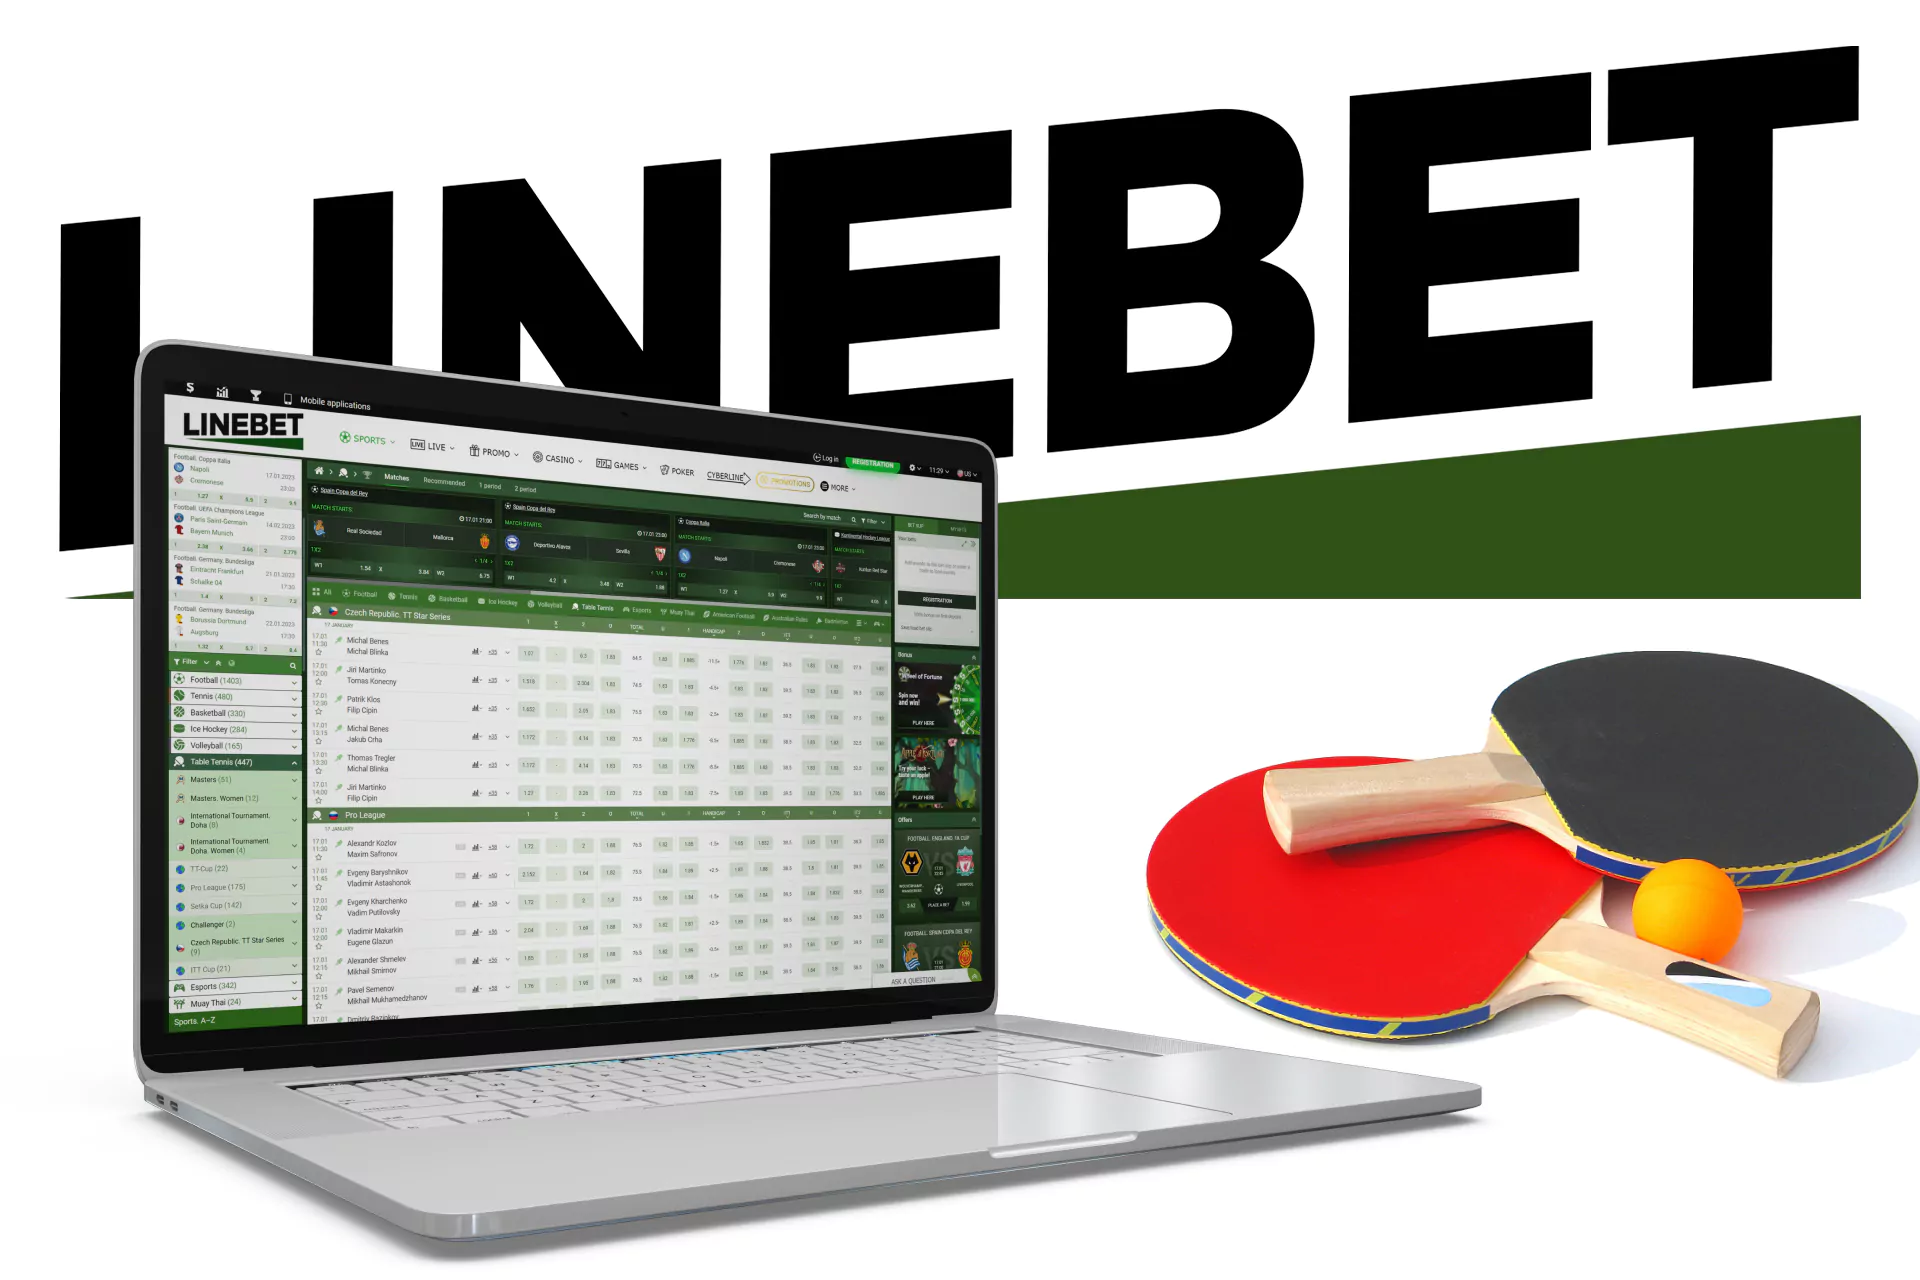 You can bet on a variety of table tennis tournaments with Linebet.